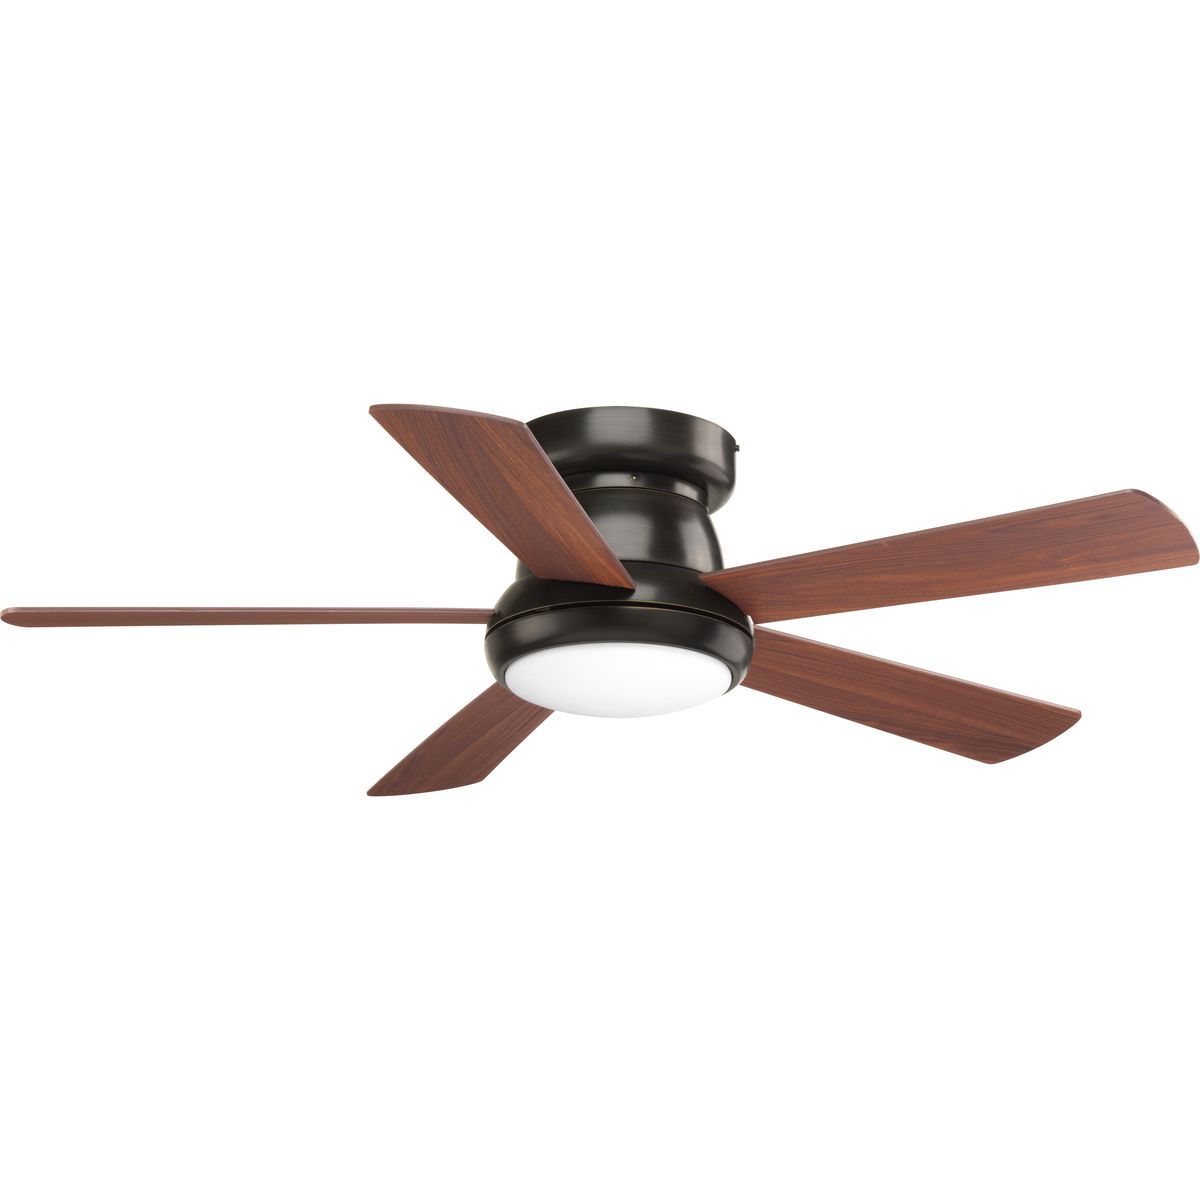 Five-blade 52 inch Vox Hugger ceiling fan features american walnut blades and an Antique Bronze finish. The LED light source offers both form and function with energy- and cost-savings benefits. A shatterproof, white opal shade contains a 17W dimmable, 3000K LED module. A remote control with batteries is included. The fan mounts close to the ceiling.